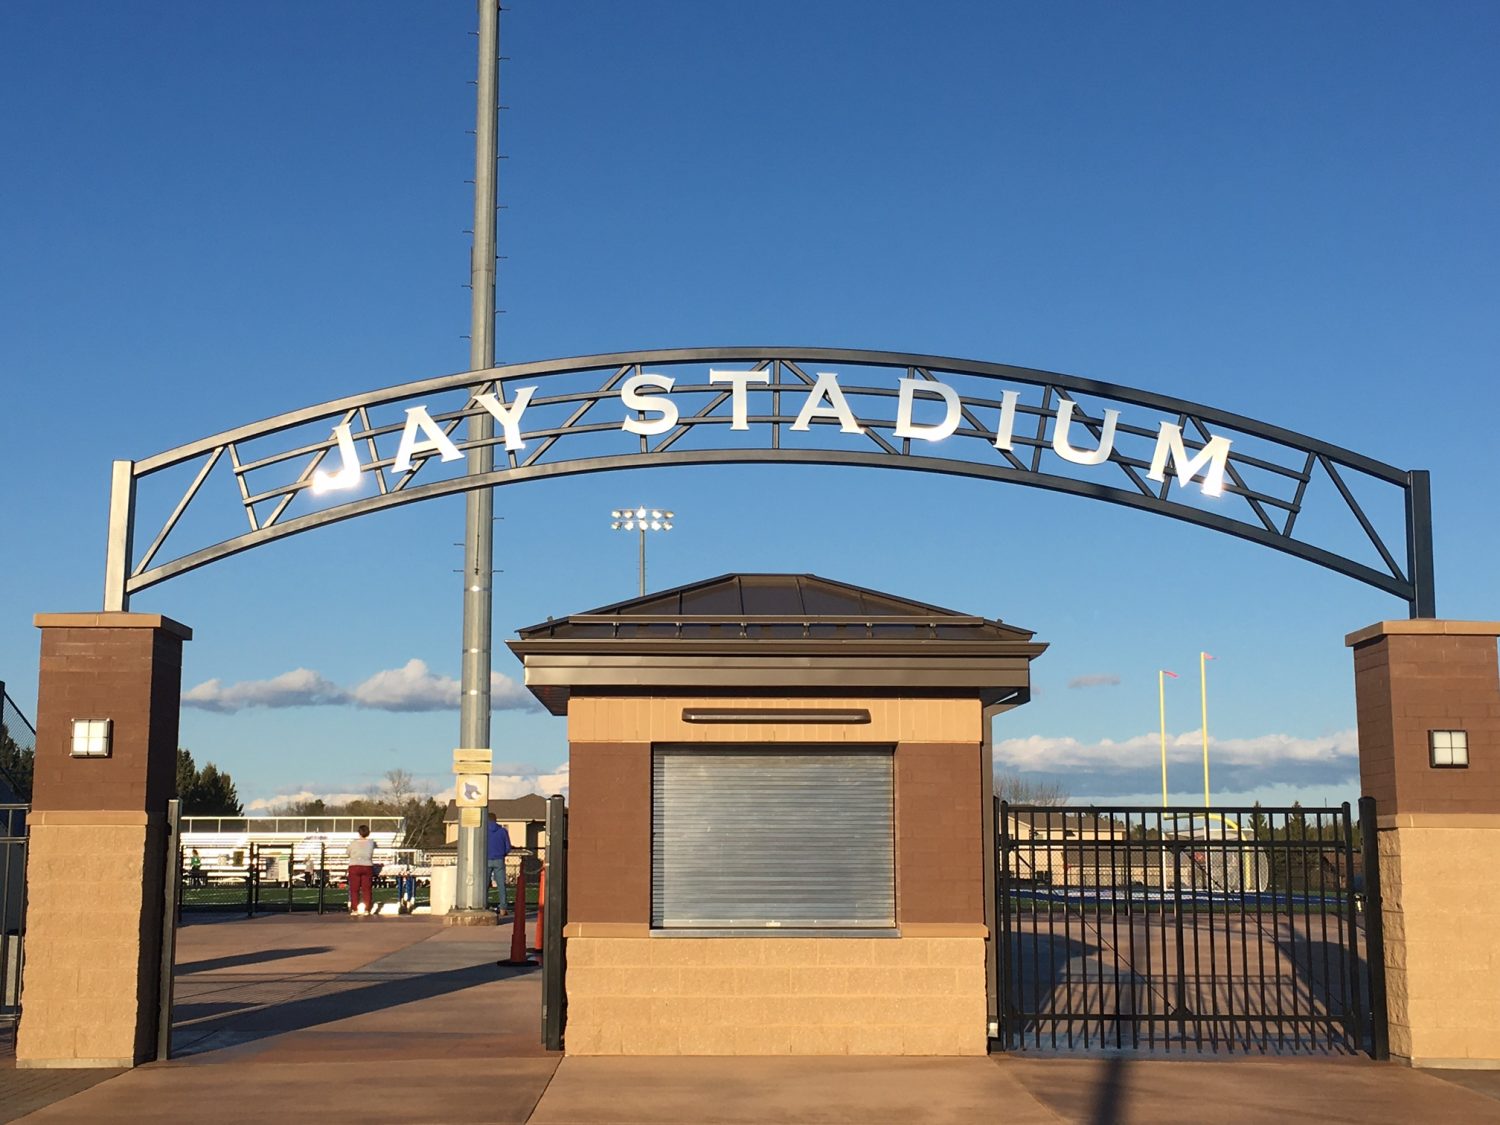 Jay Stadium to host ‘strong’ day for Special Olympics